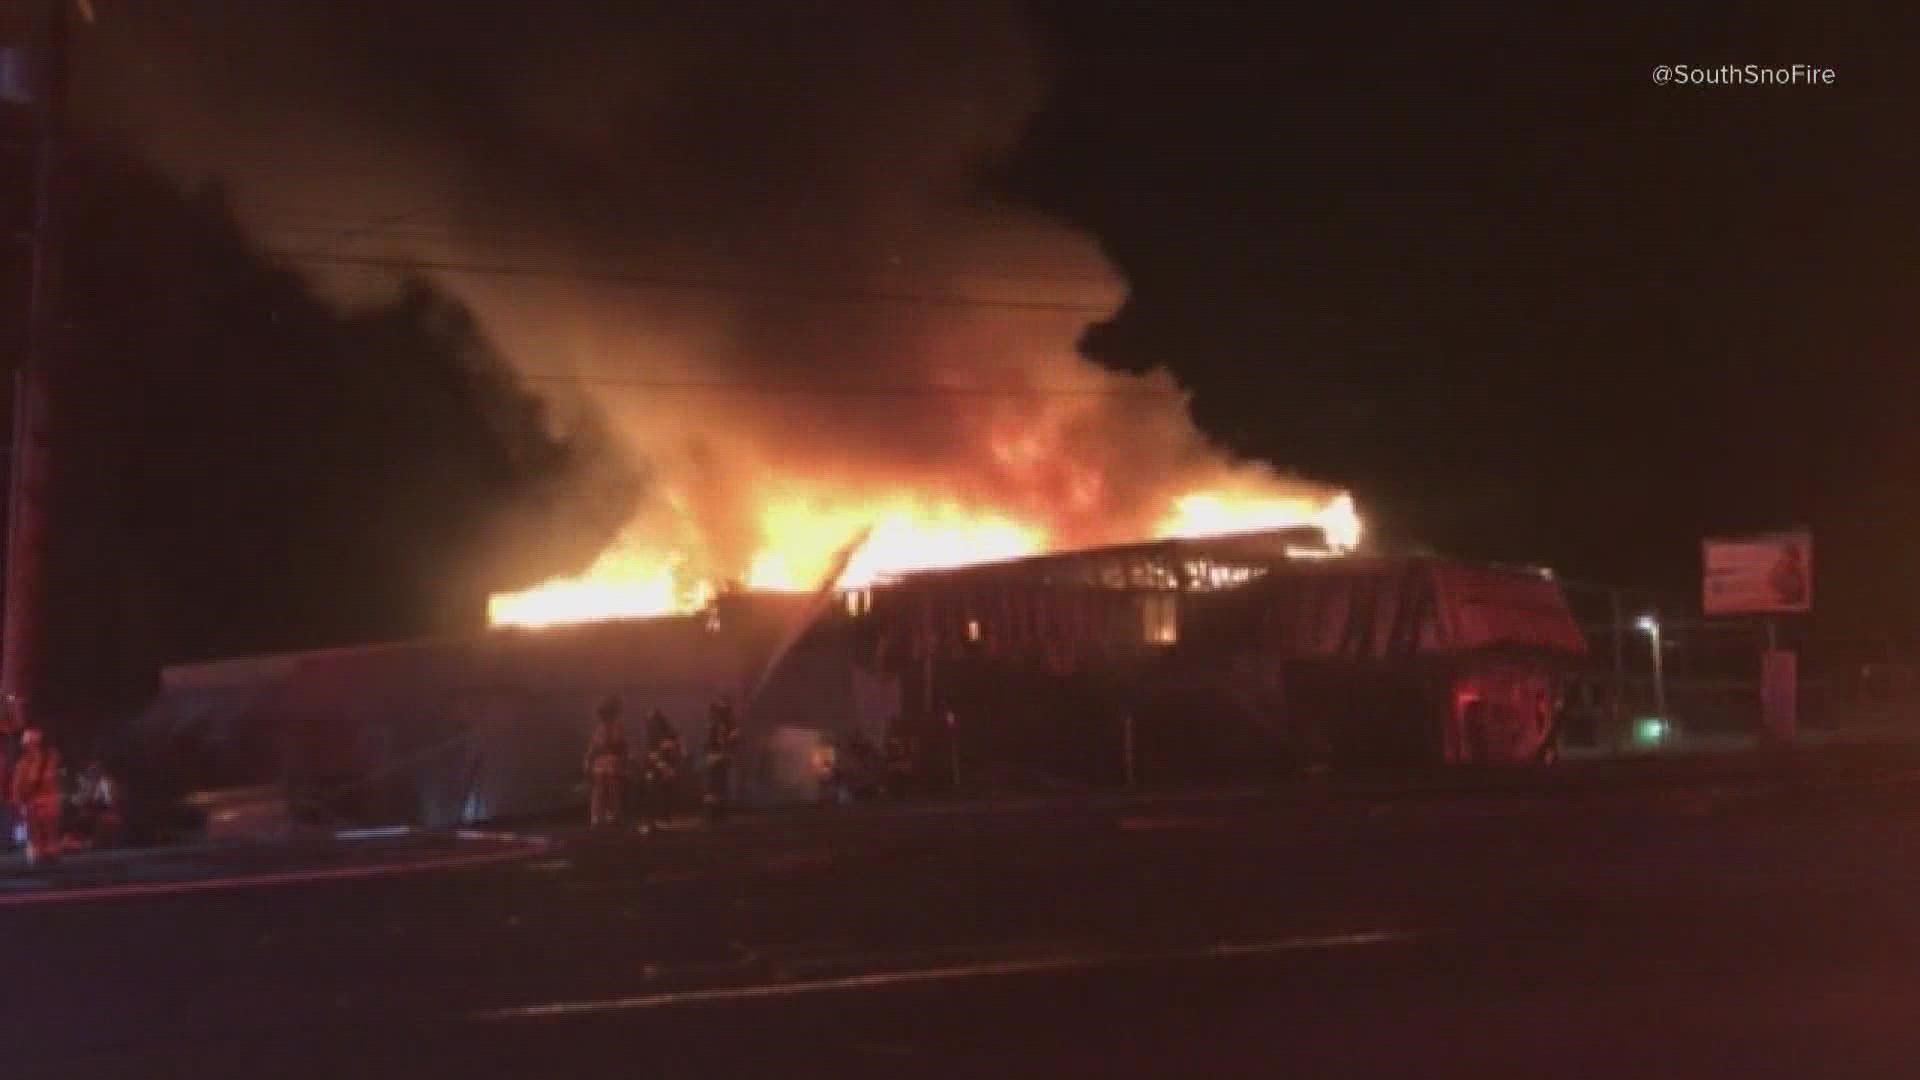 The fire was reported just before 3:30 a.m. at Highway 99 and 156th St SW in Lynnwood.